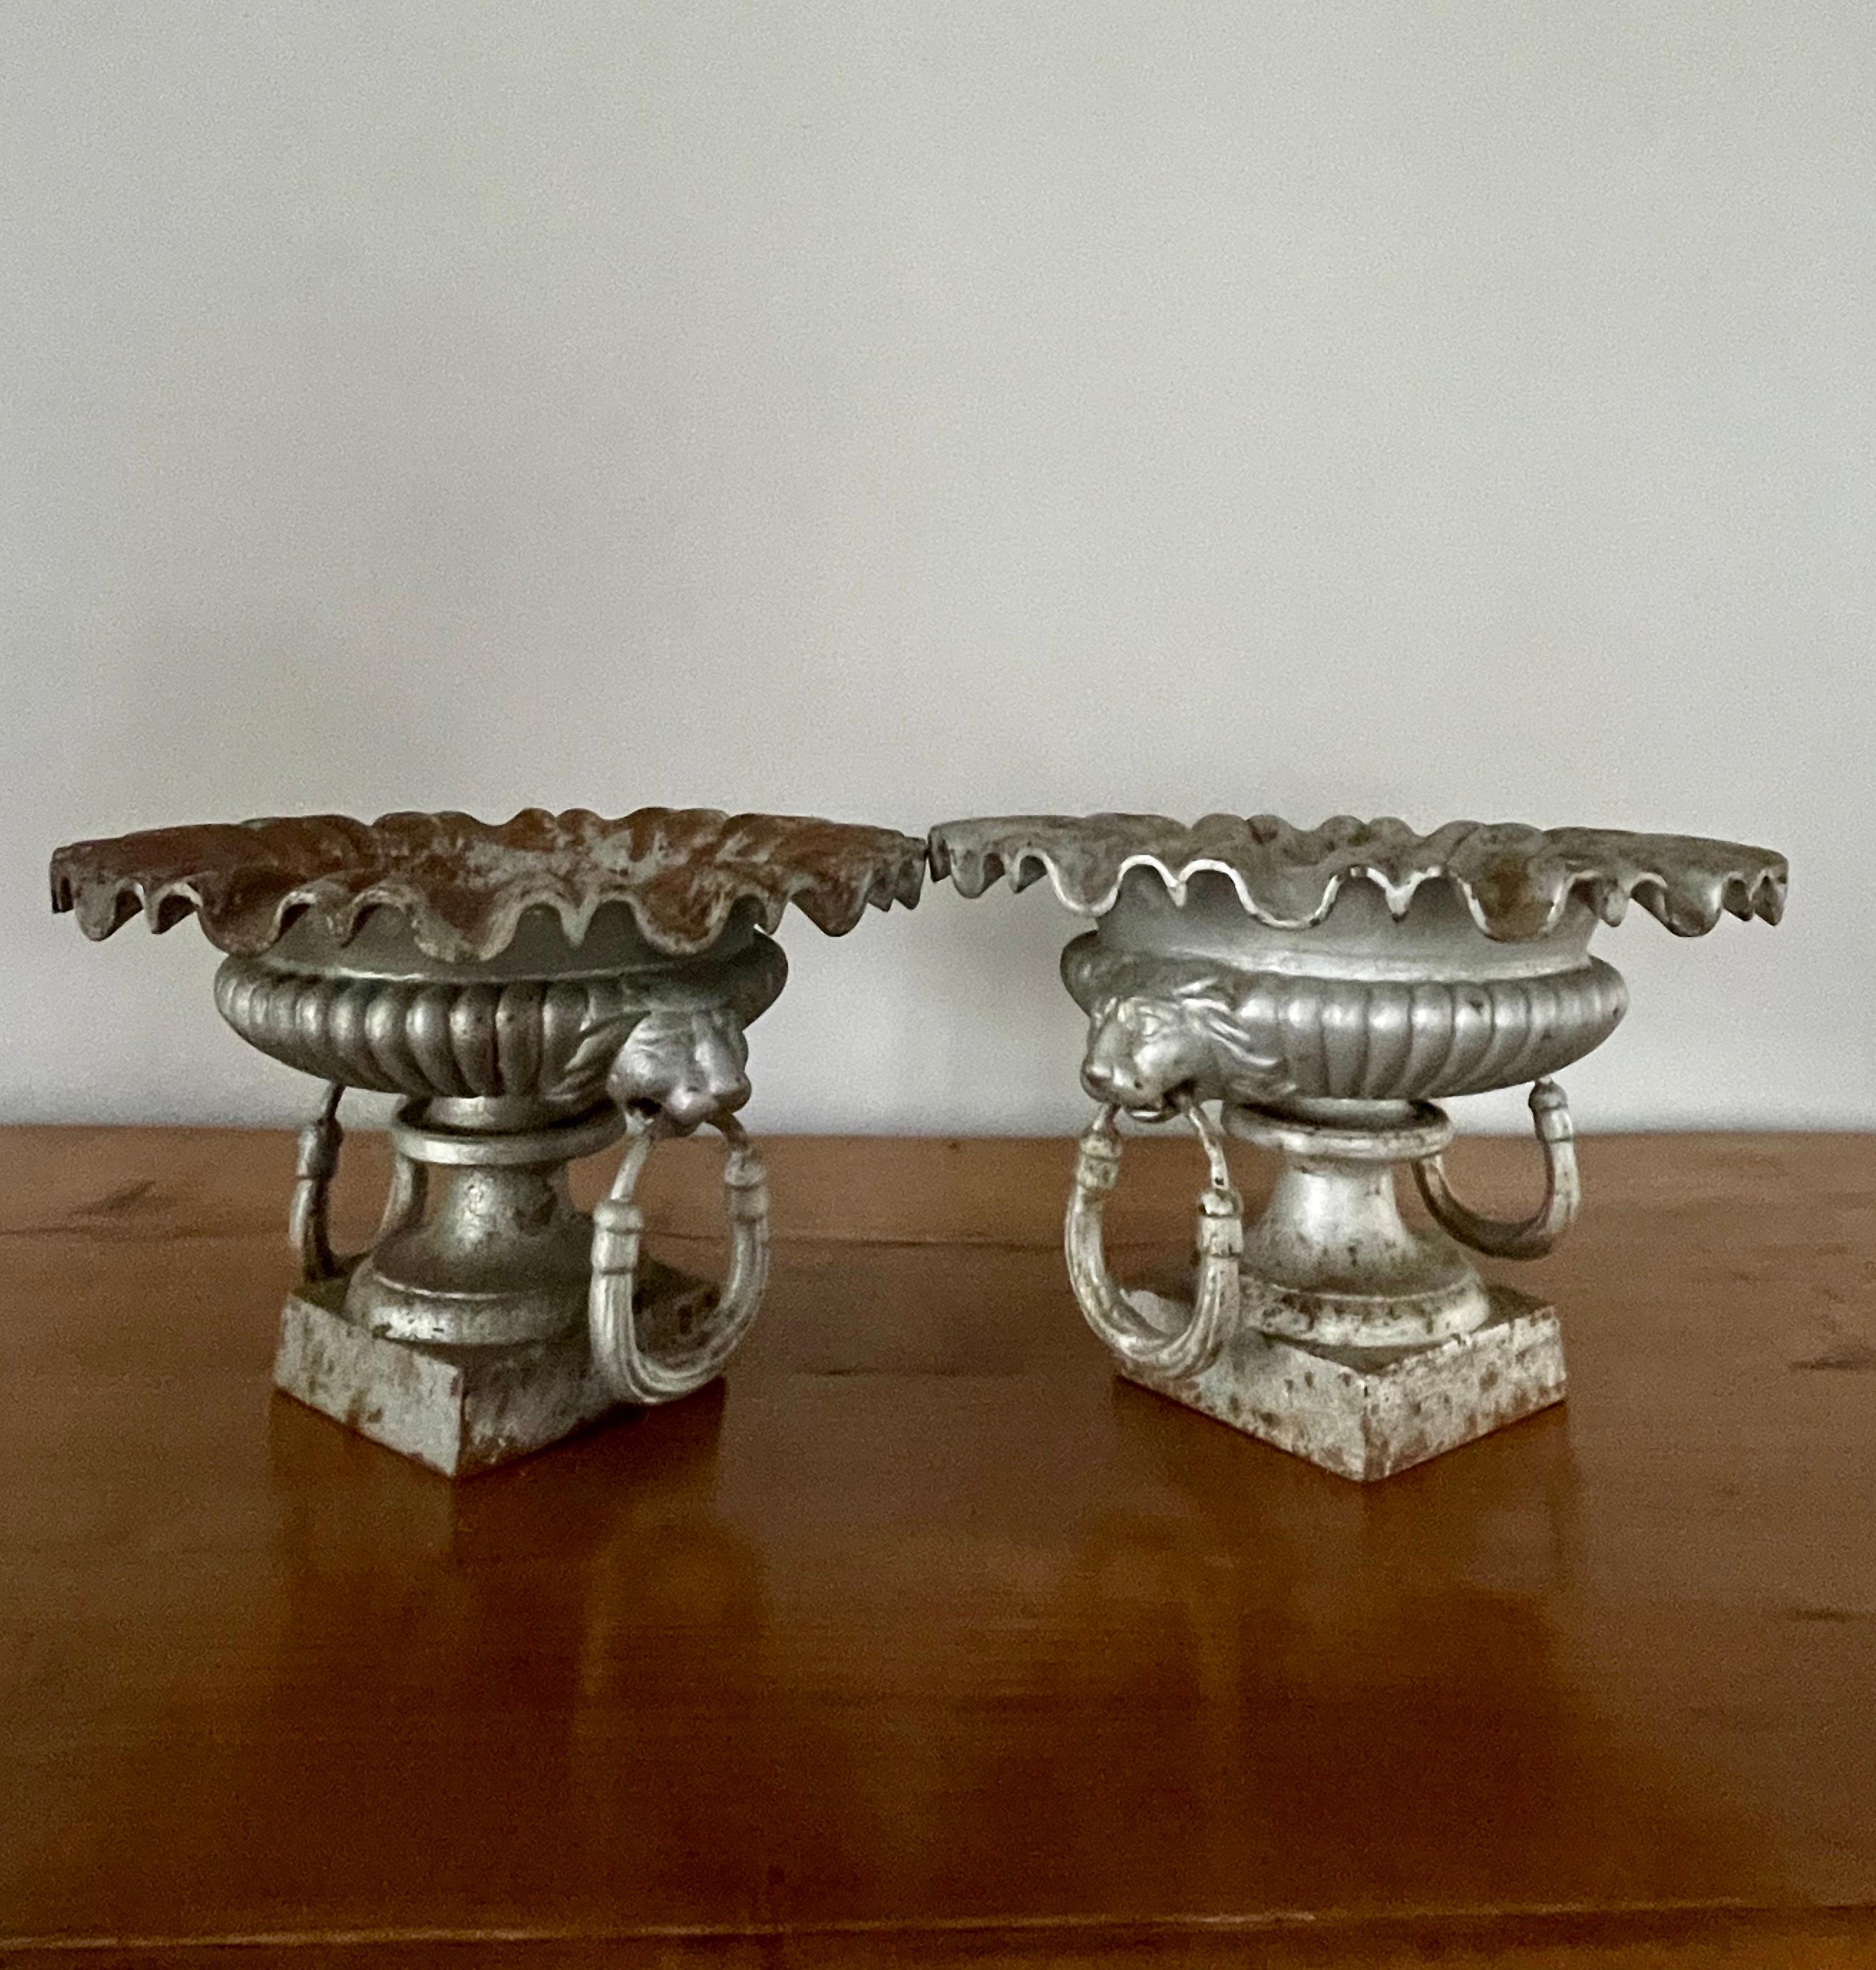 Napoleon III Rare Pair of Small French 19th C Cast Iron Urns with Lion Heads and Ruffled Rims For Sale